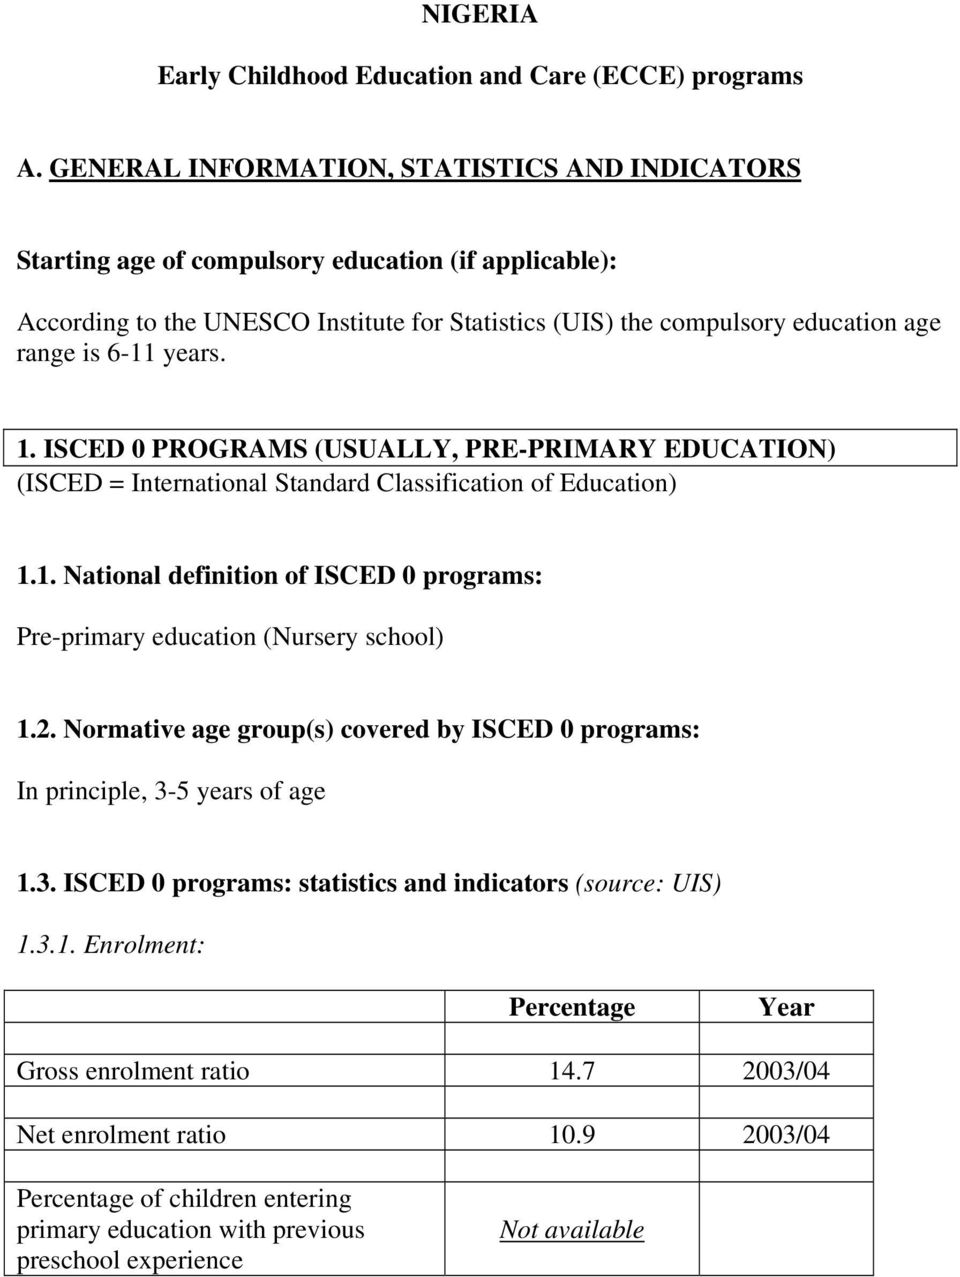 years. 1. ISCED 0 PROGRAMS (USUALLY, PRE-PRIMARY EDUCATION) (ISCED = International Standard Classification of Education) 1.1. National definition of ISCED 0 programs: Pre-primary education (Nursery school) 1.